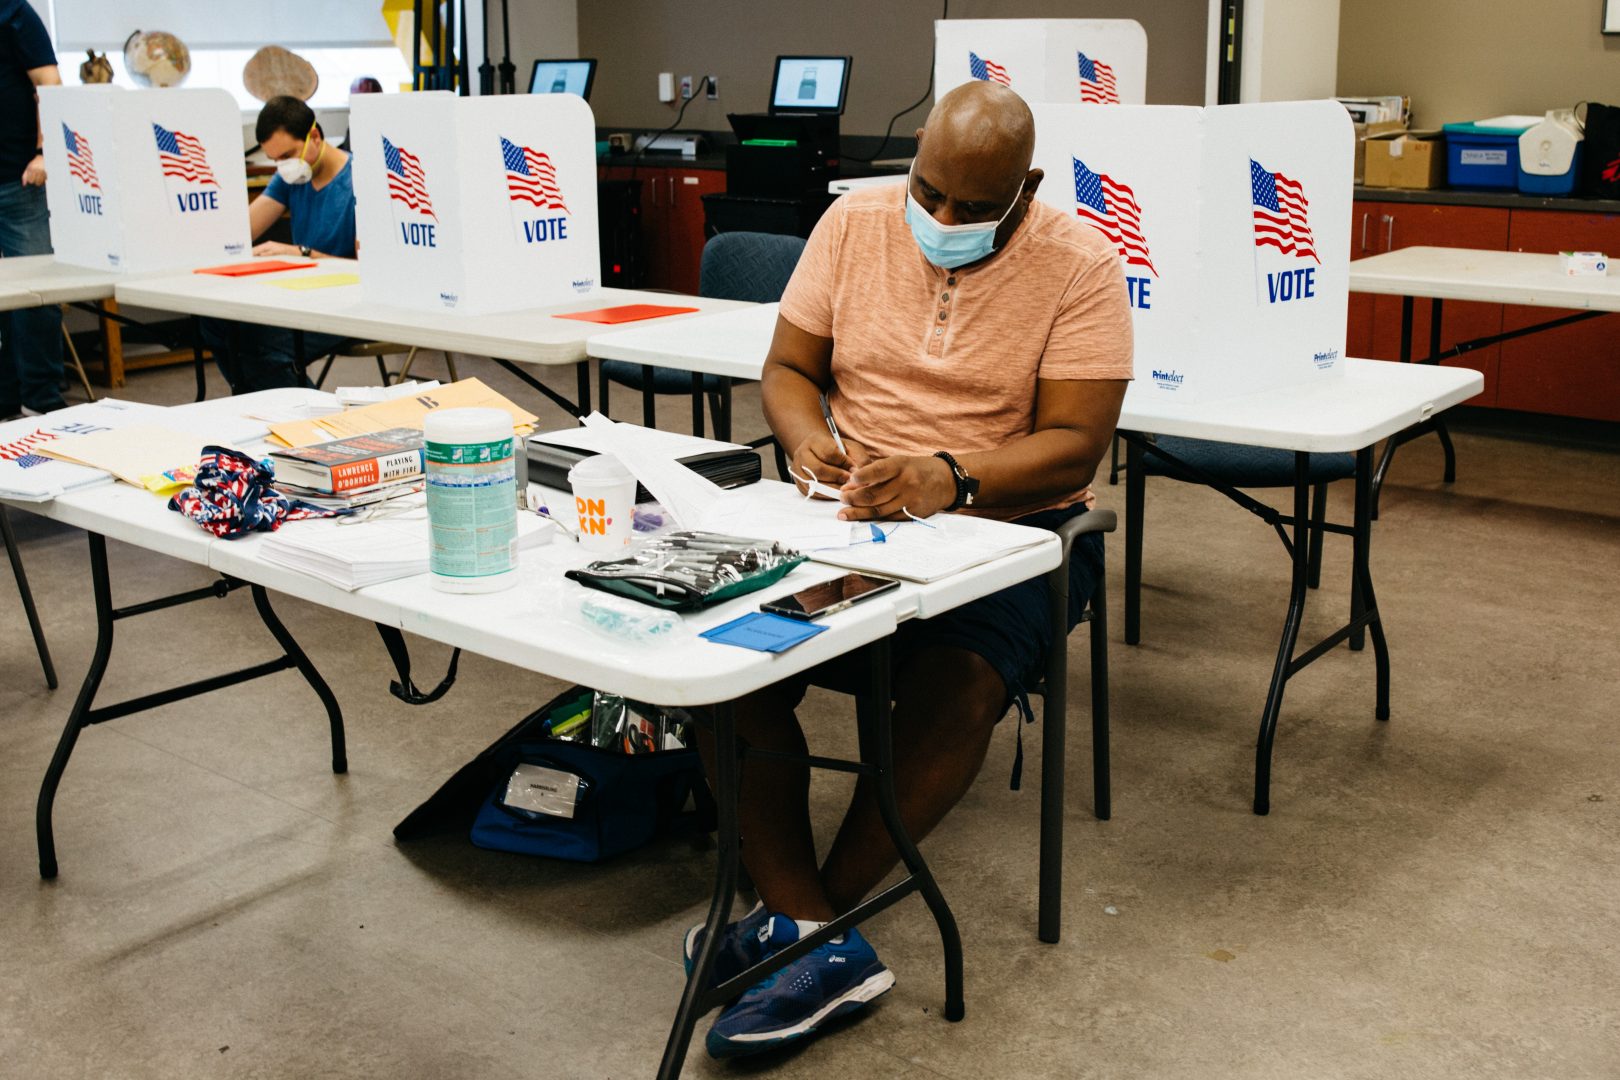 An election worker fills out paperwork at Harrisburg's 6th ward at the Susquehanna Art Museum, on June 2, 2020. Poll workers across the state were issued face masks to help stop the spread of coronavirus.